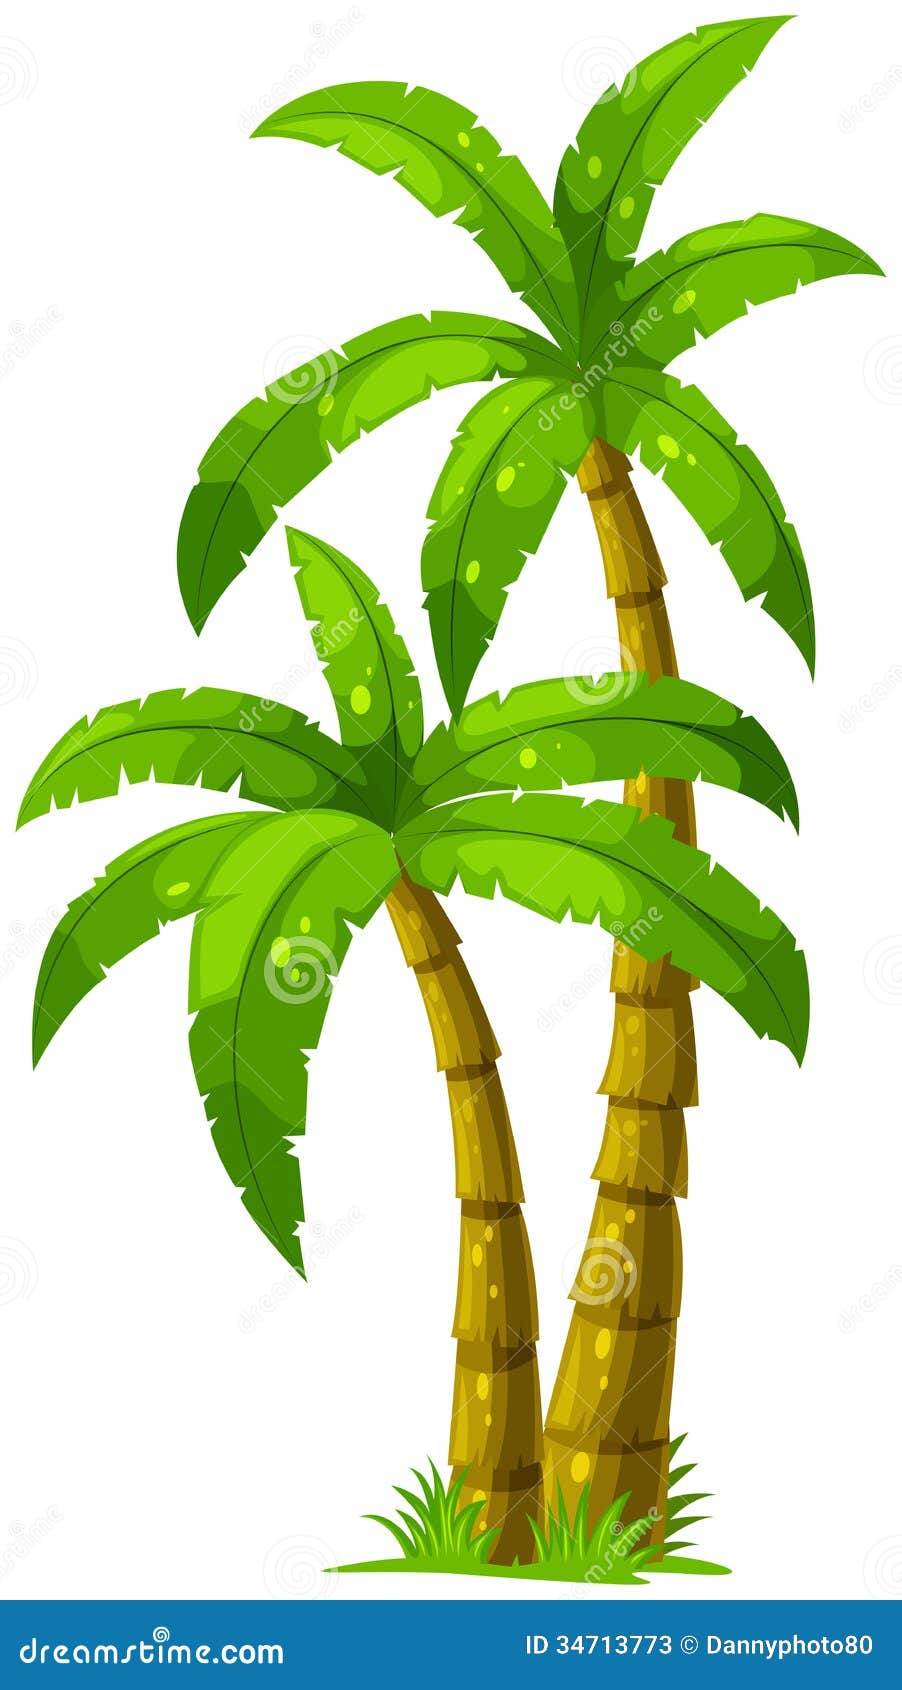 Illustration of the two palm trees on a white background.